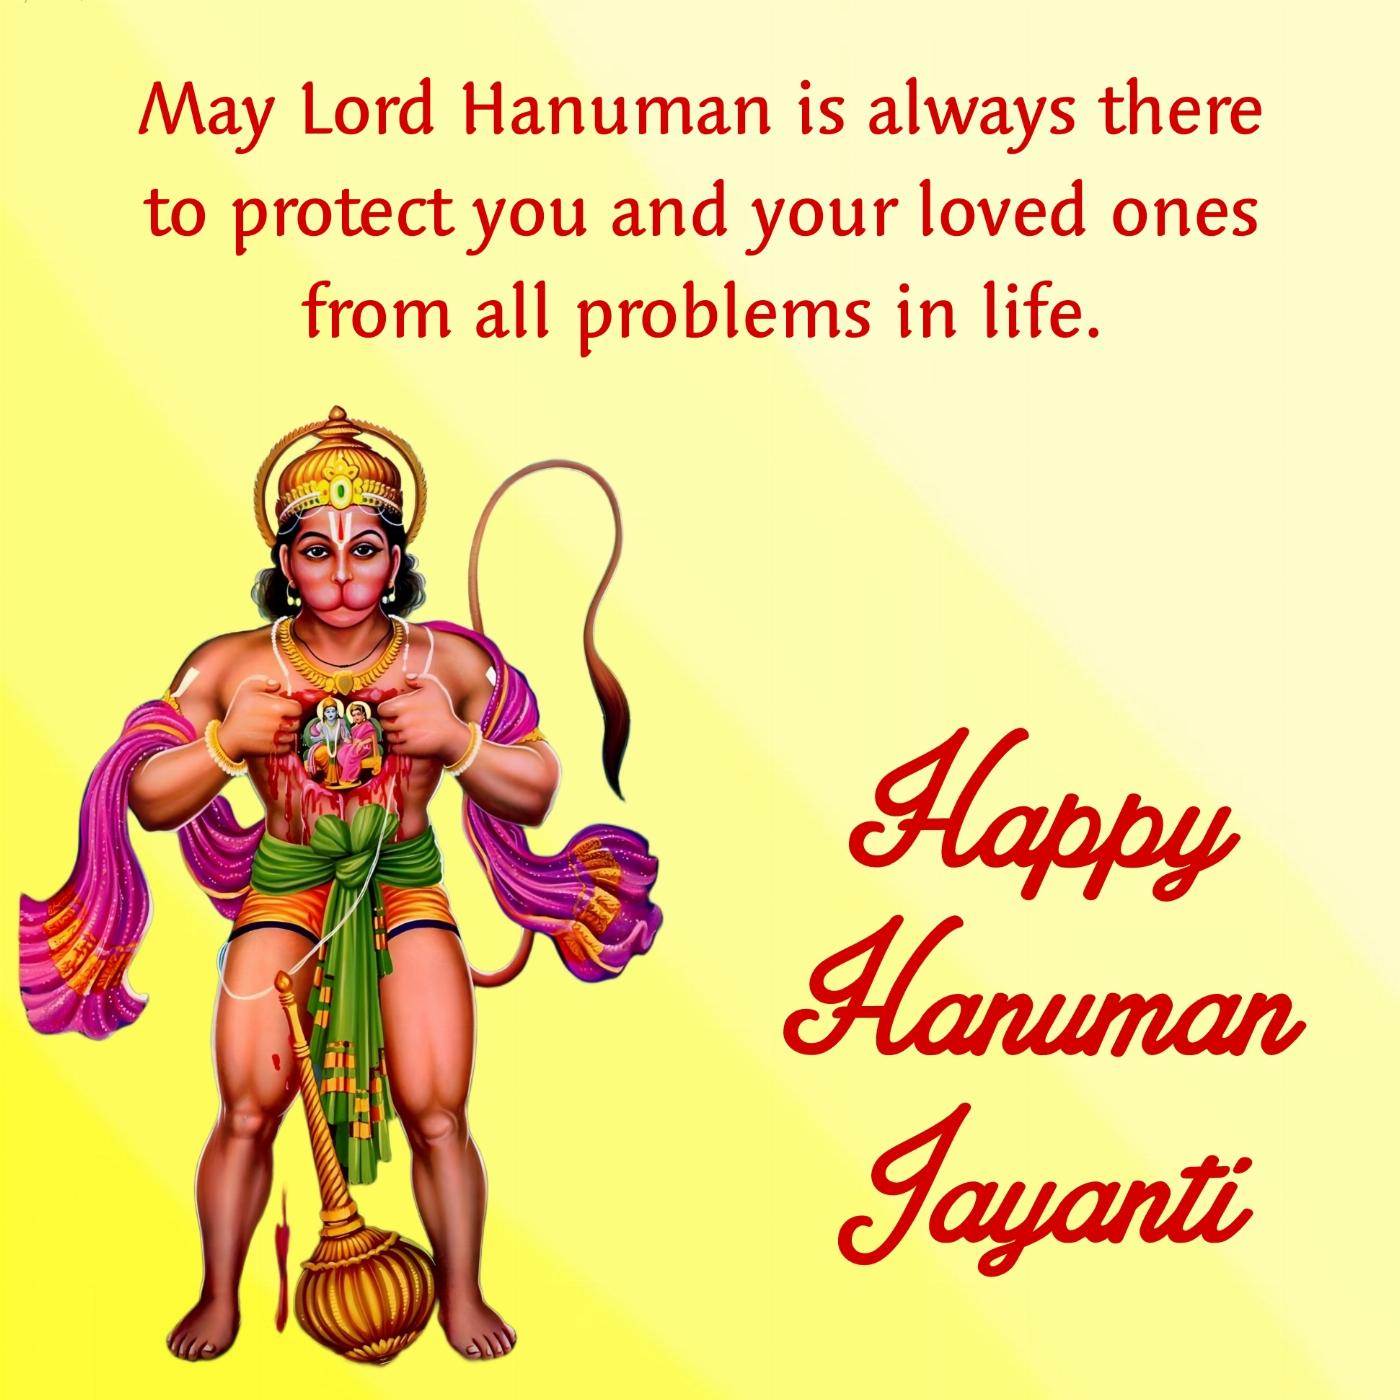 May Lord Hanuman is always there to protect you